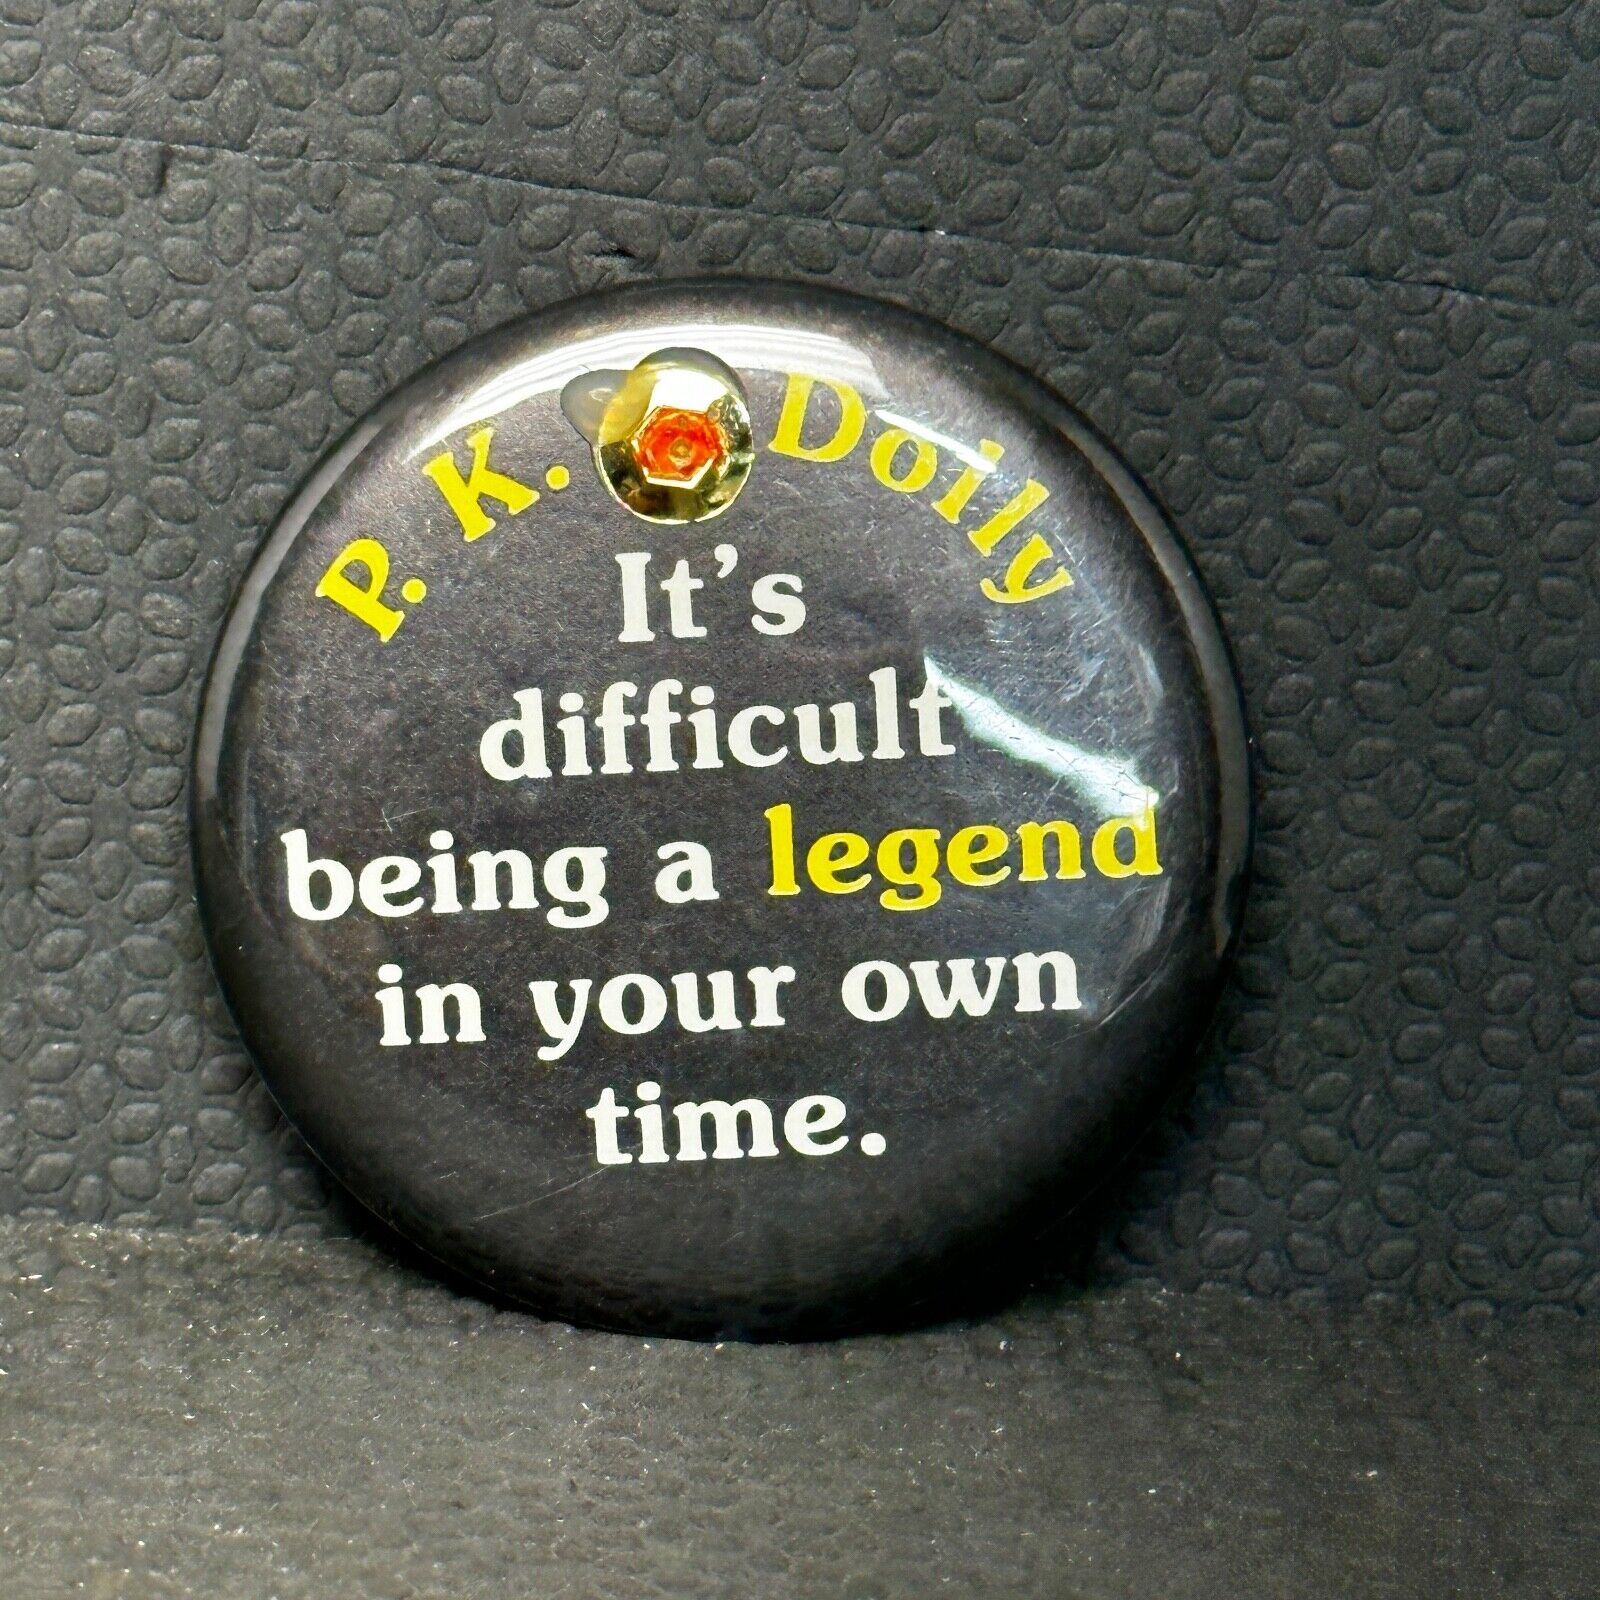 Vintage P. K. Dolly It\'s difficult being a legend in your own time pin button